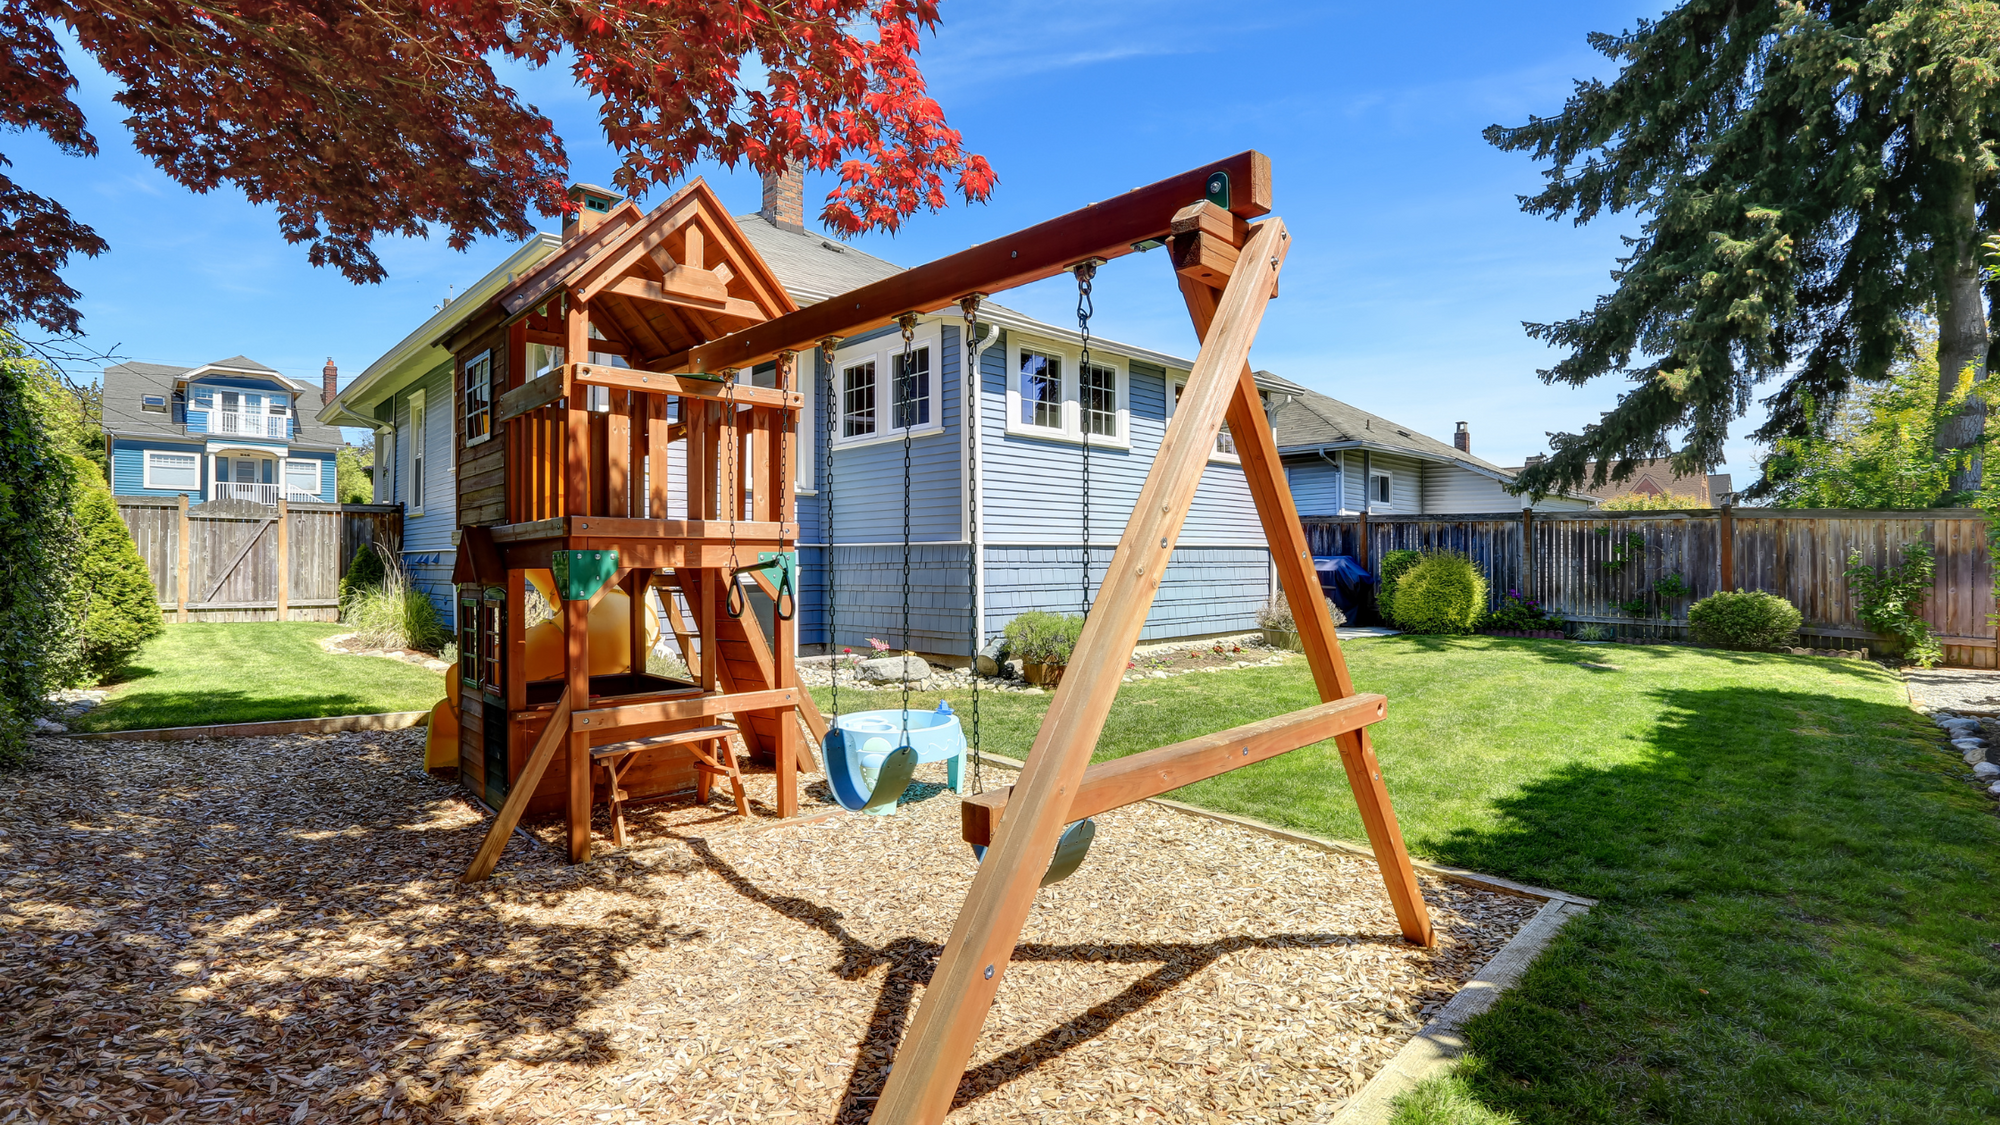 Creating Endless Fun and Adventure with Backyard Play Sets